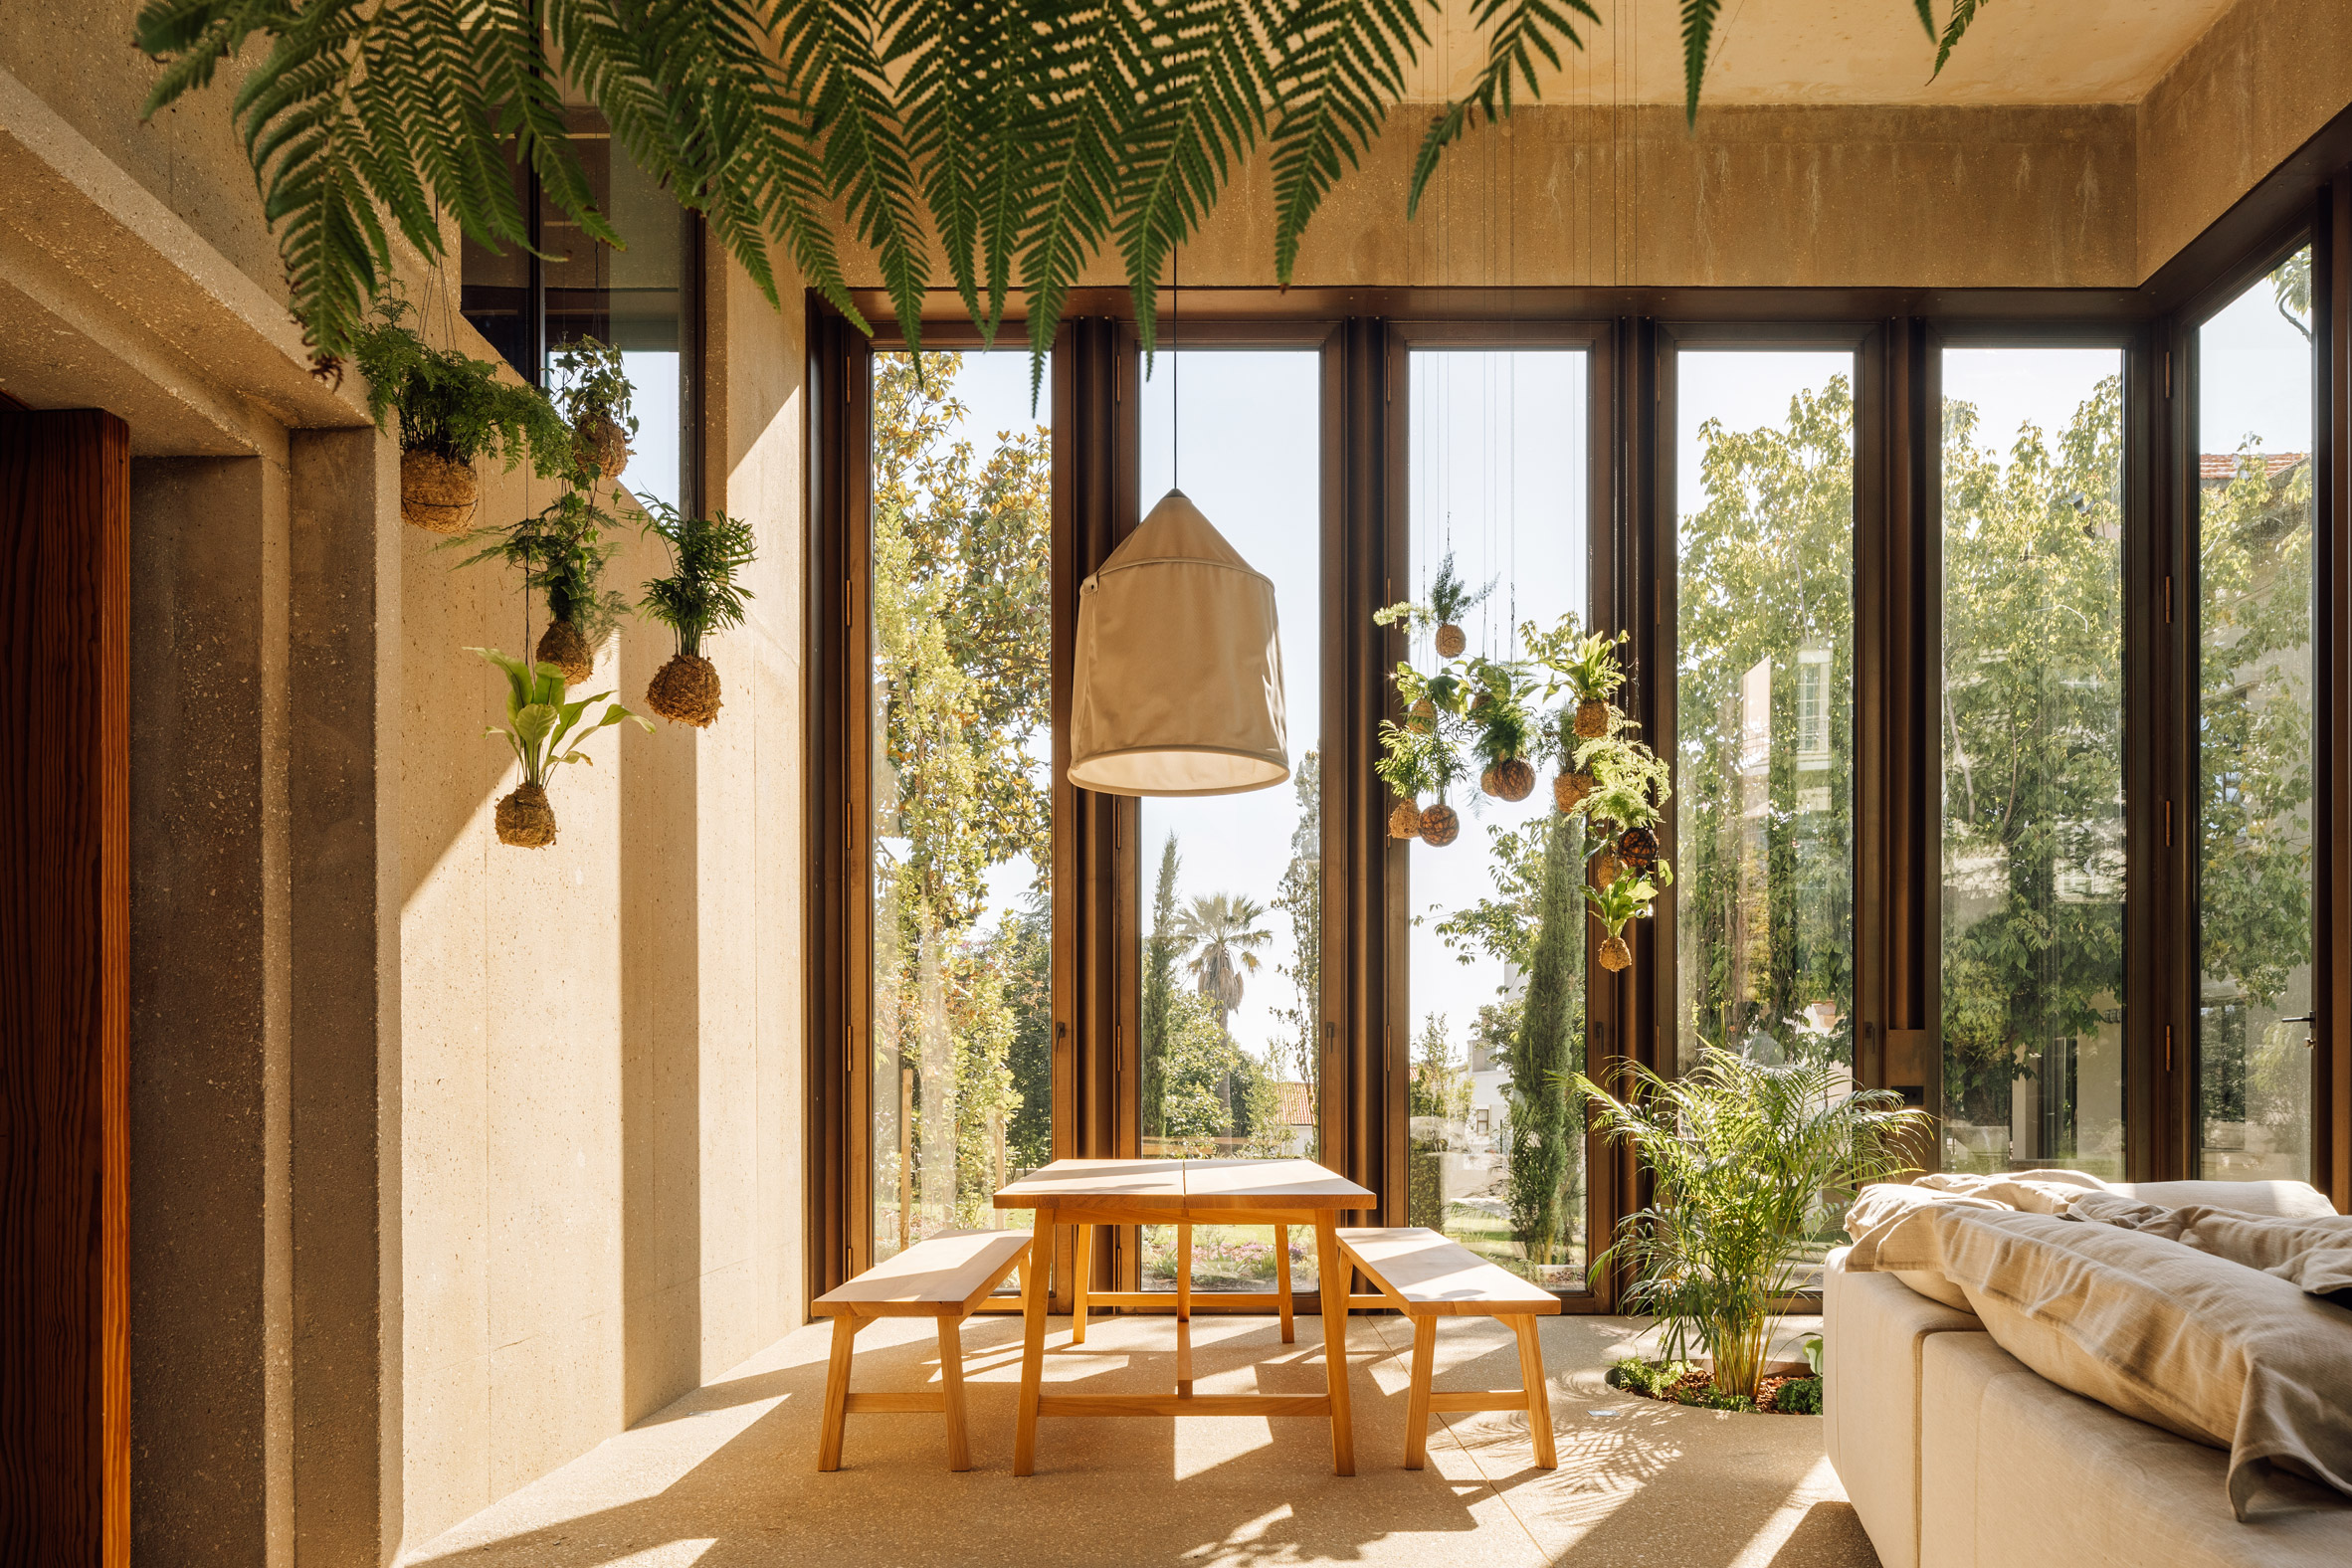 Living area of garden pavilion by Bak Gordon Arquitectos with banquet table and benches and hanging plants